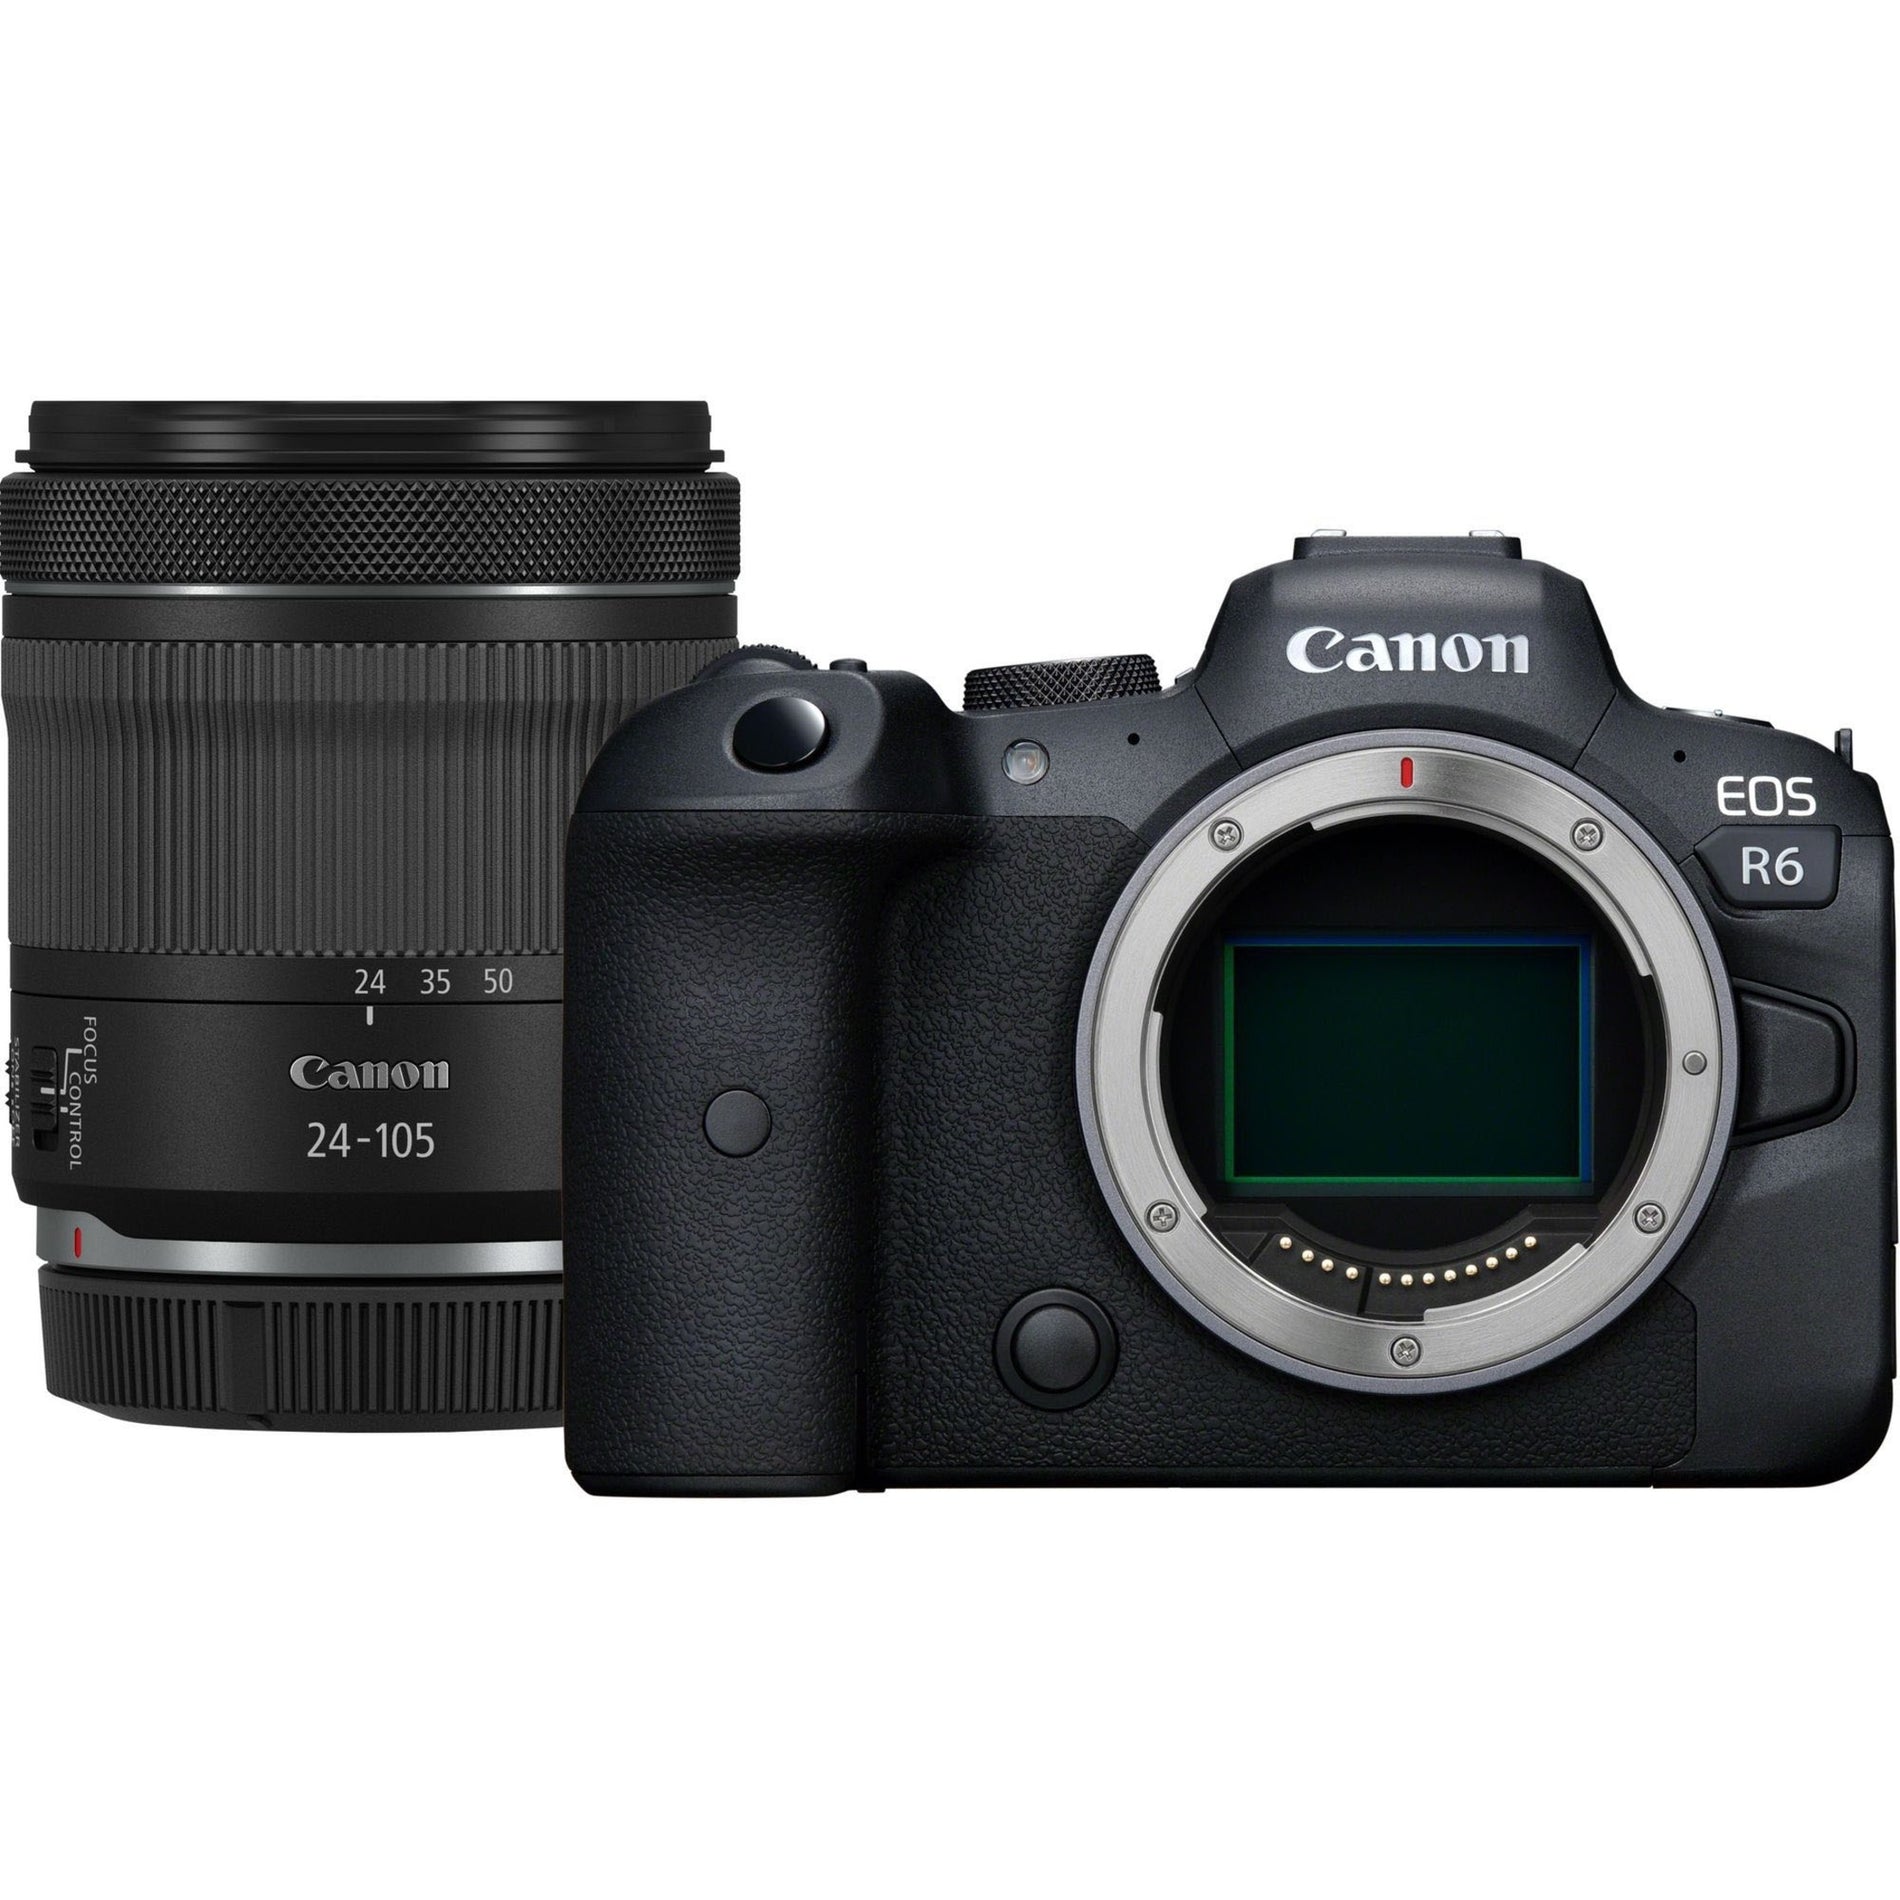 Canon 4082C012 EOS R6 Mirrorless Camera with Lens, 20.1 Megapixel, 4K Video, Touchscreen